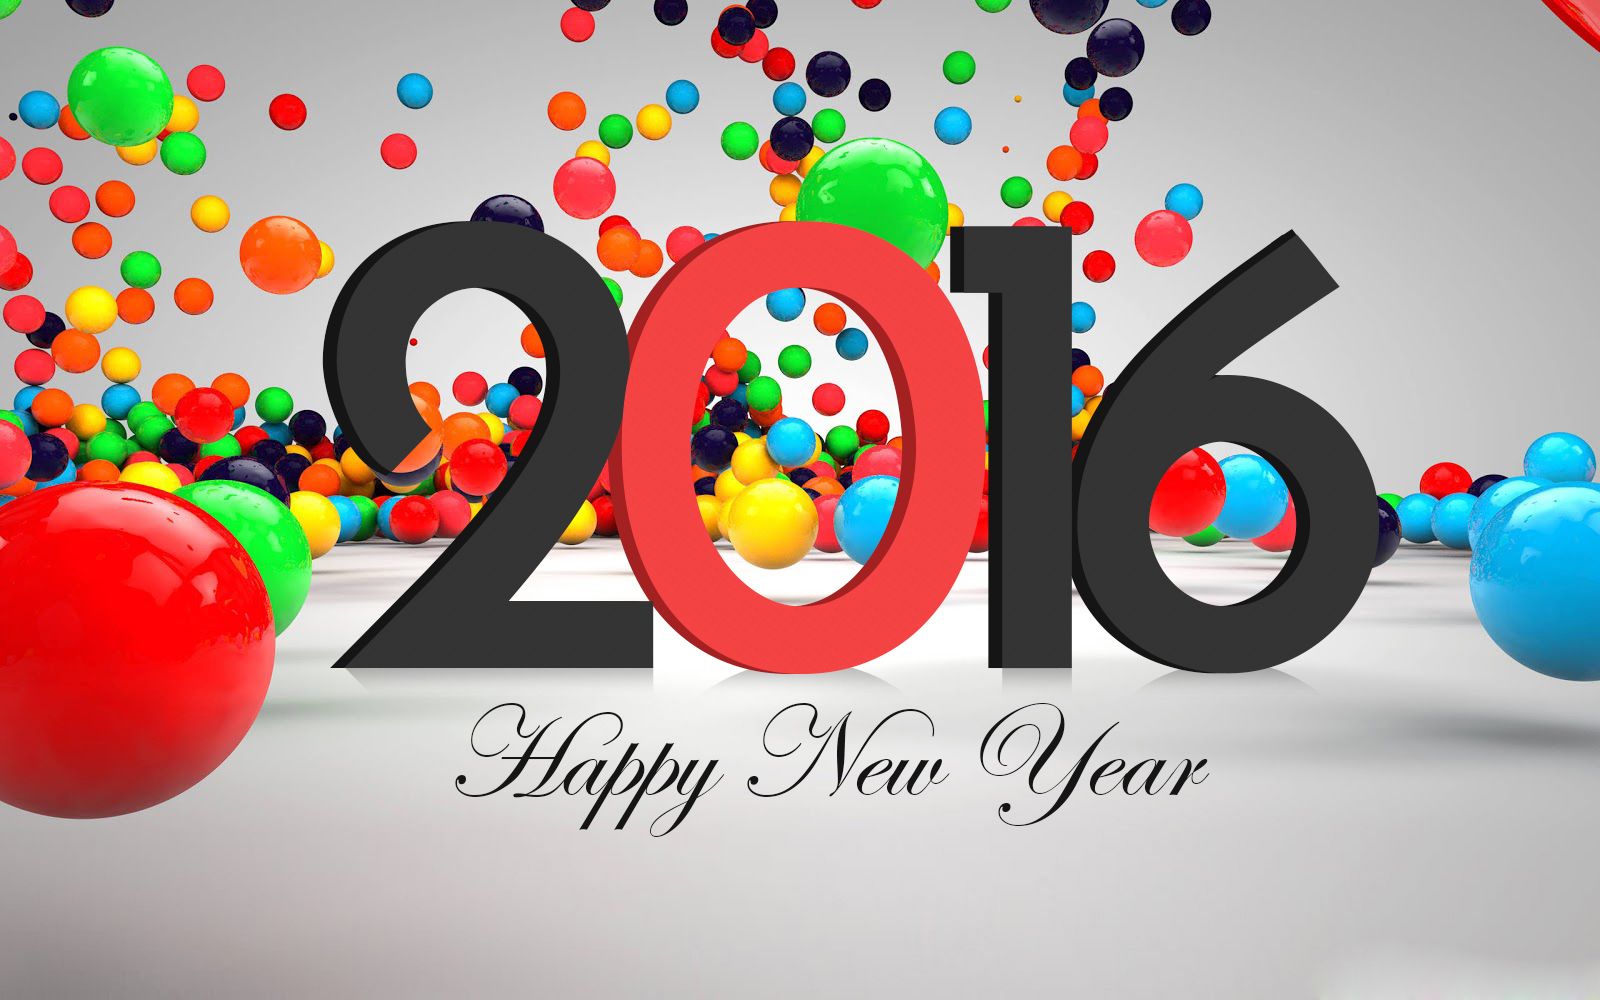 Happy New Year Wallpapers New Year Desktop Backgrounds